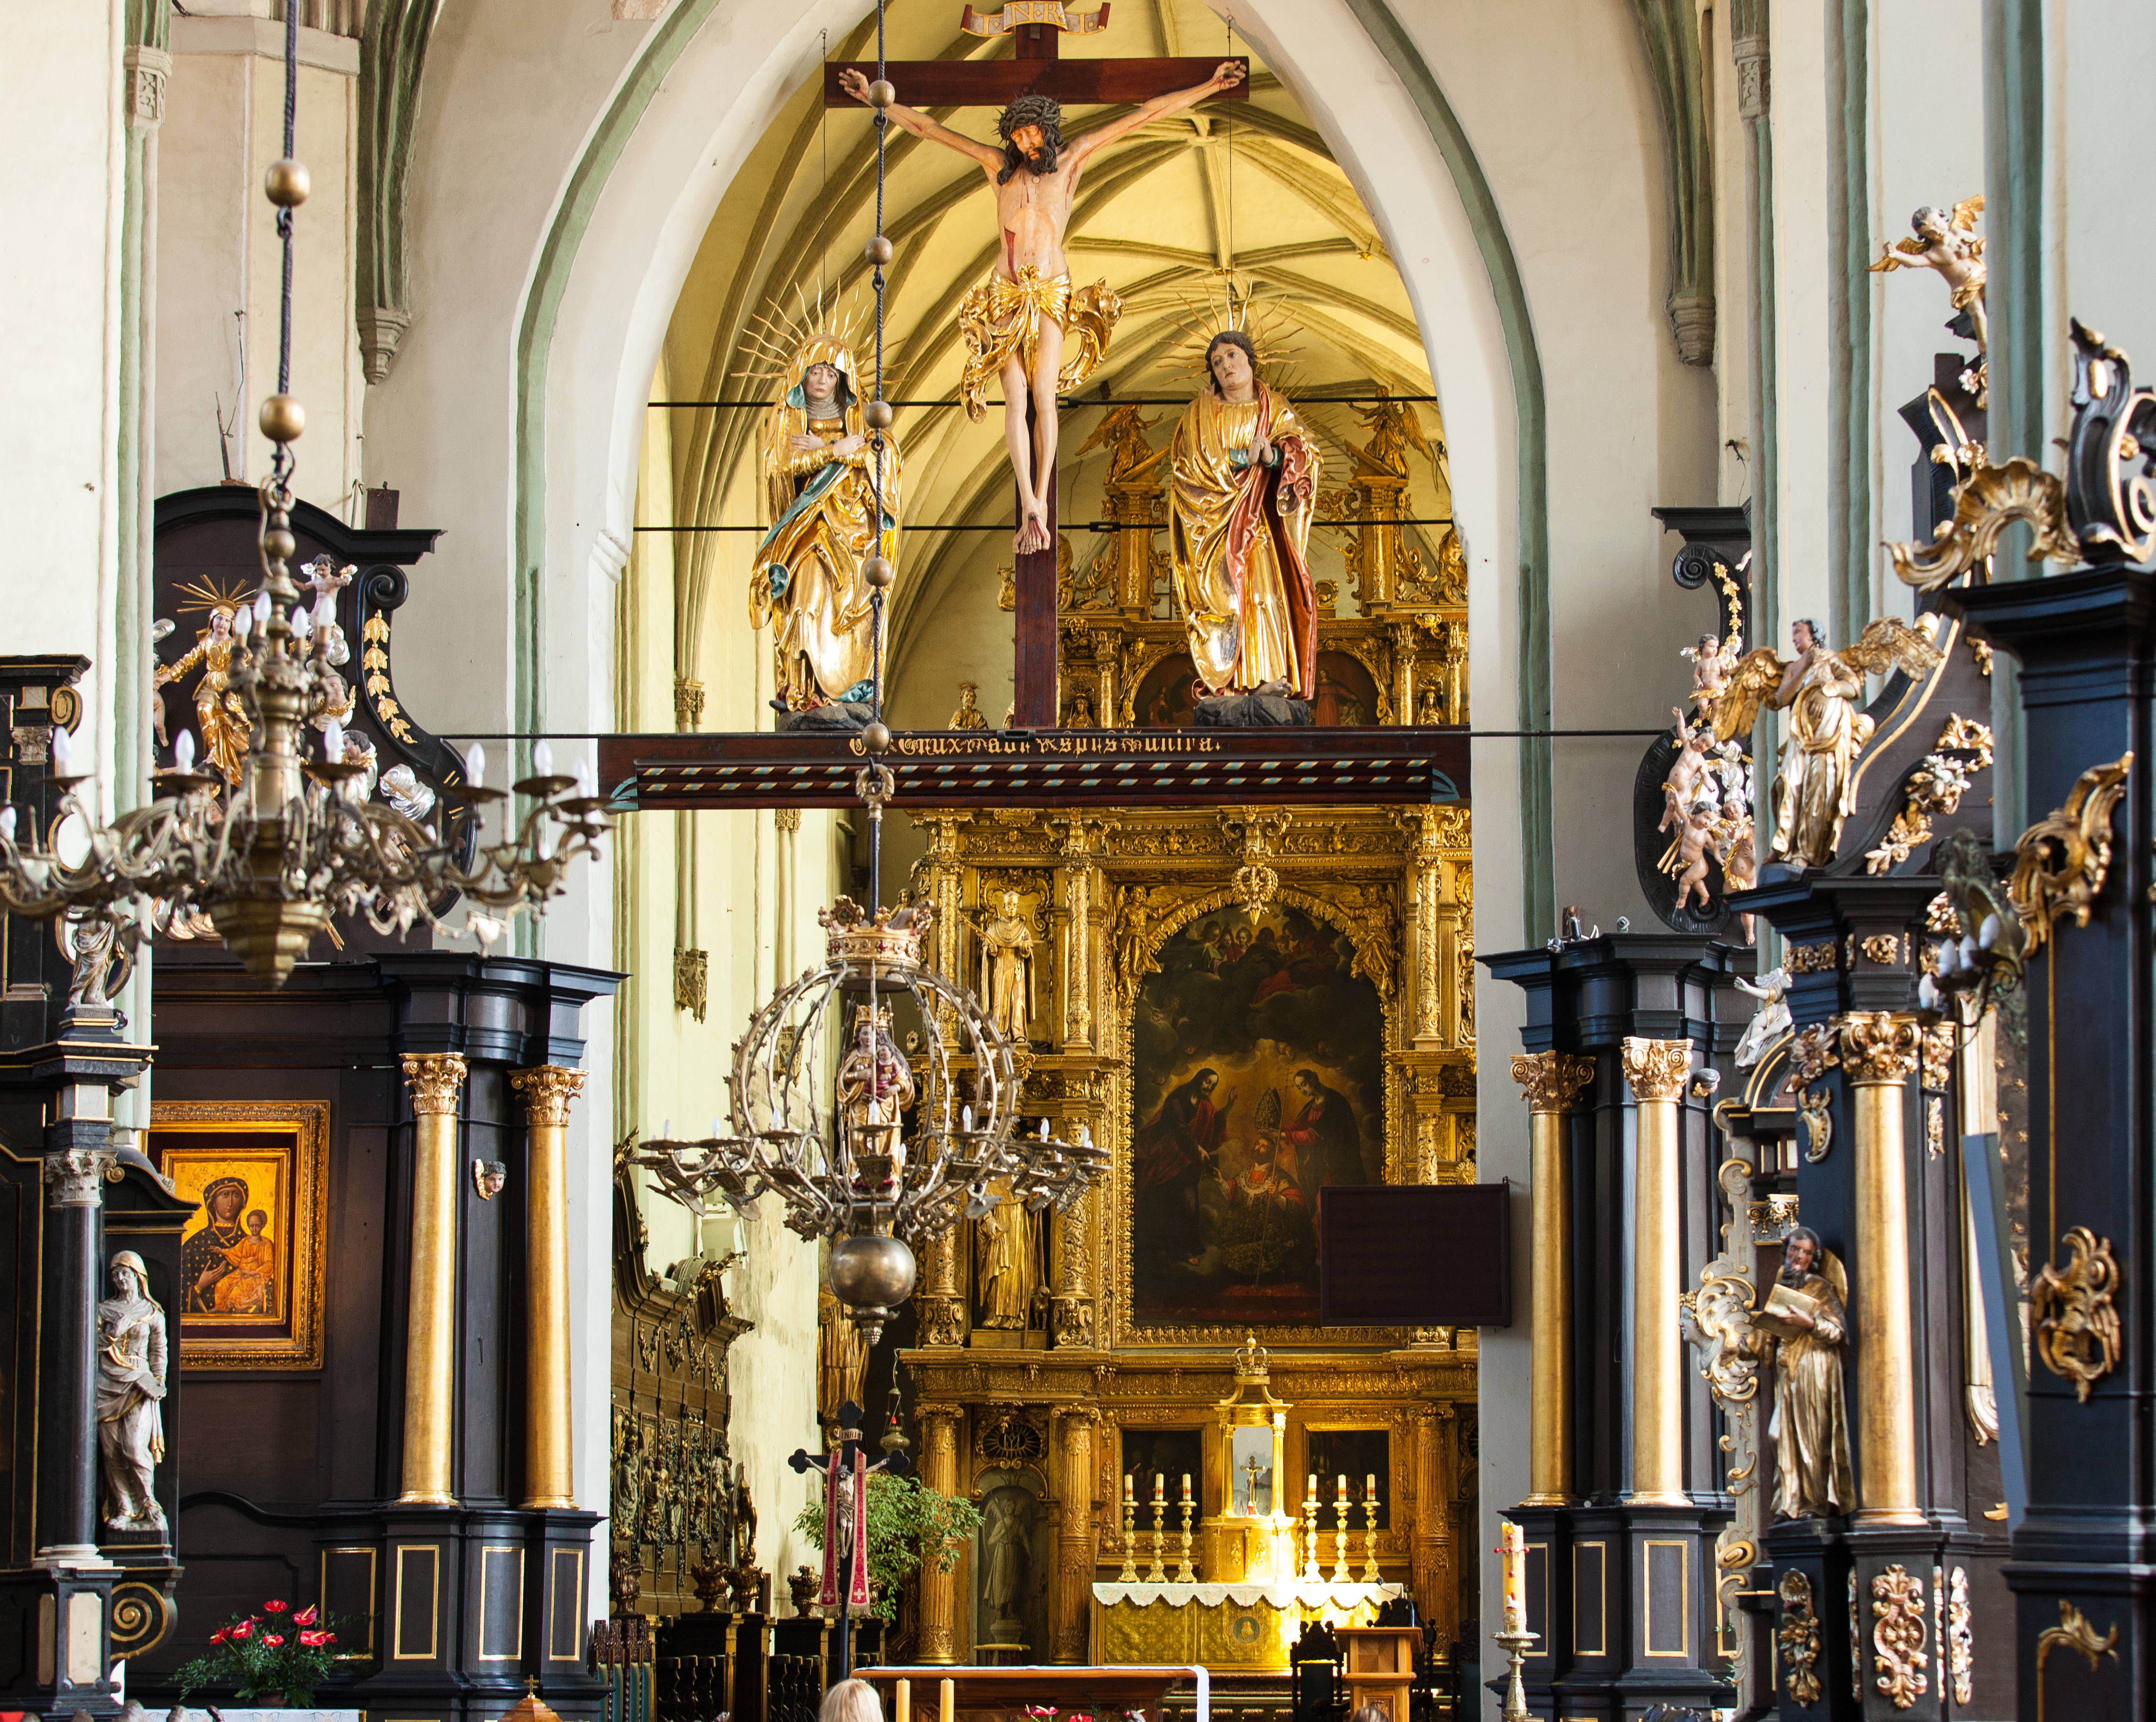 inside a church in Gdansk city, Poland, June 2014, picture 35